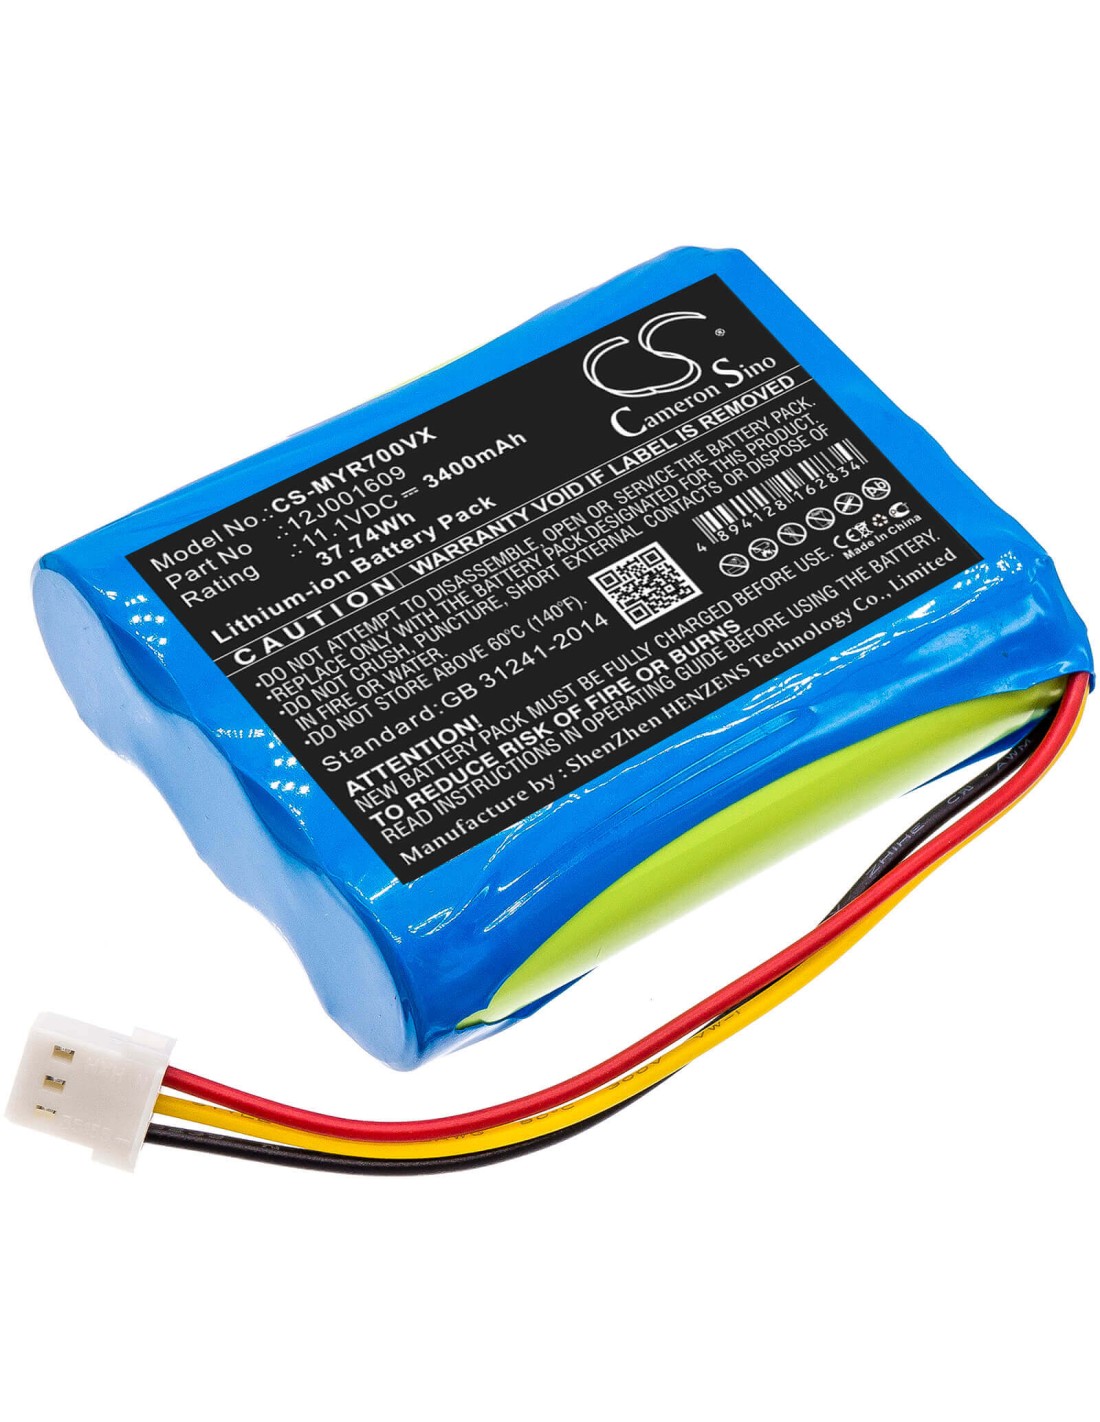 Battery for Moneual, Everybot, Rs500, Everybot 11.1V, 3400mAh - 37.74Wh